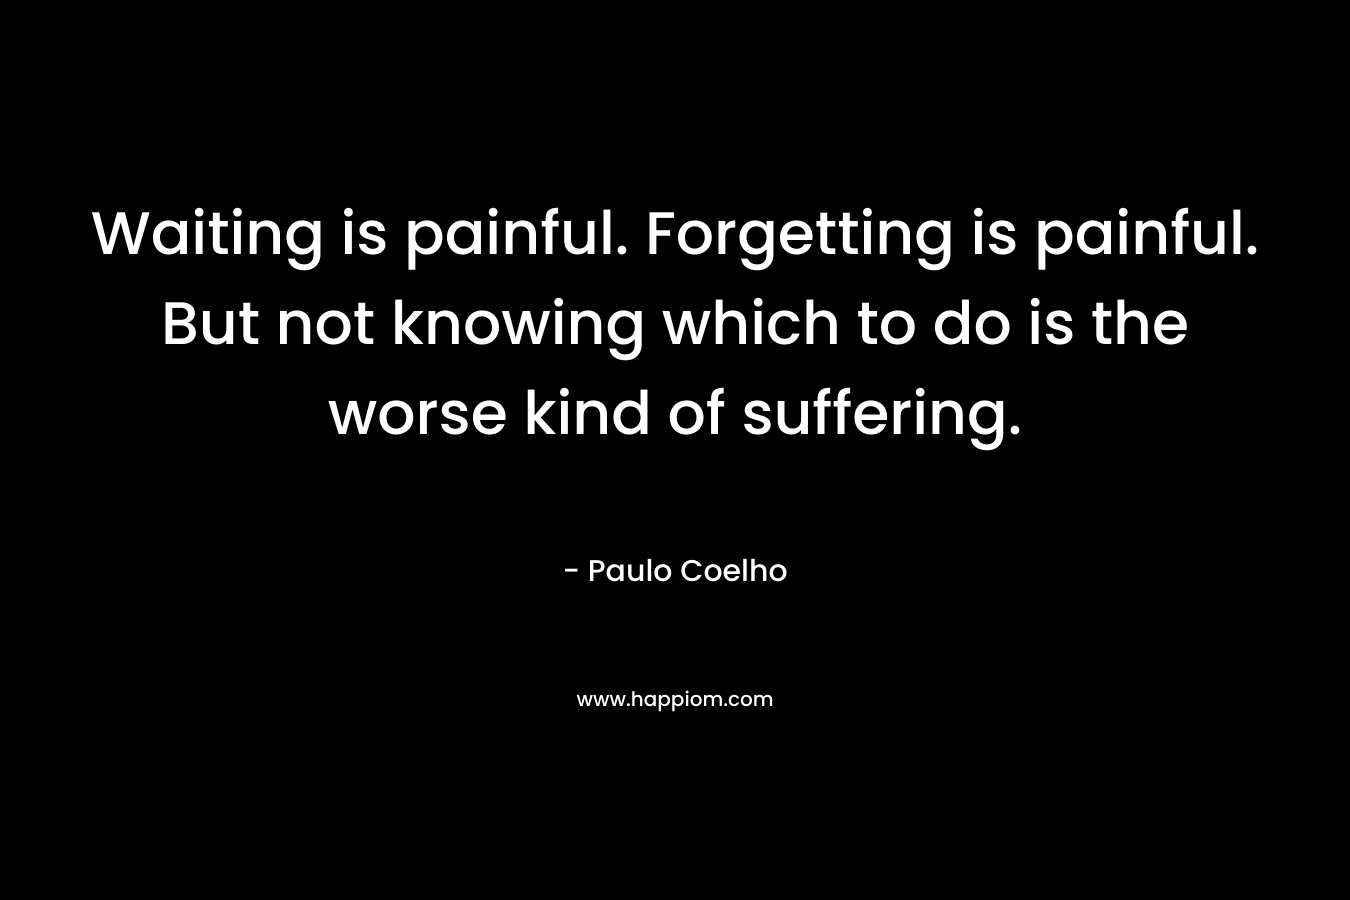 Waiting is painful. Forgetting is painful. But not knowing which to do is the worse kind of suffering. – Paulo Coelho